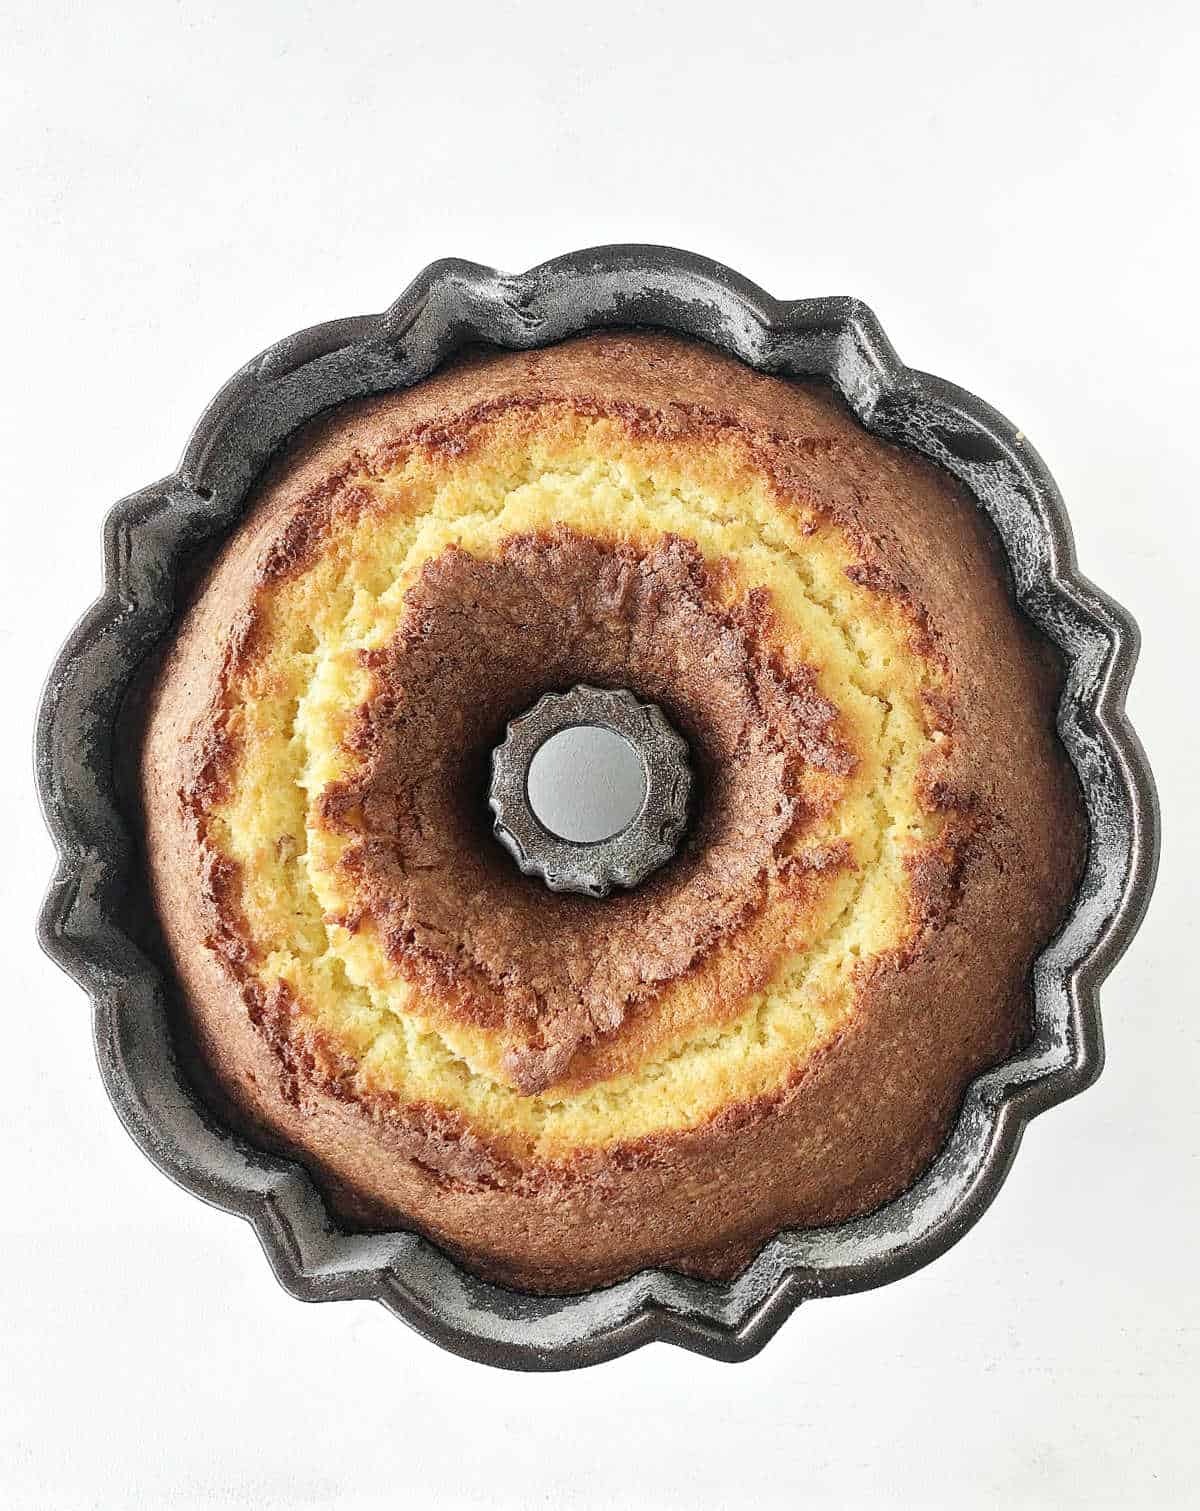 Baked lemon bundt cake in the pan. Top view. White background.